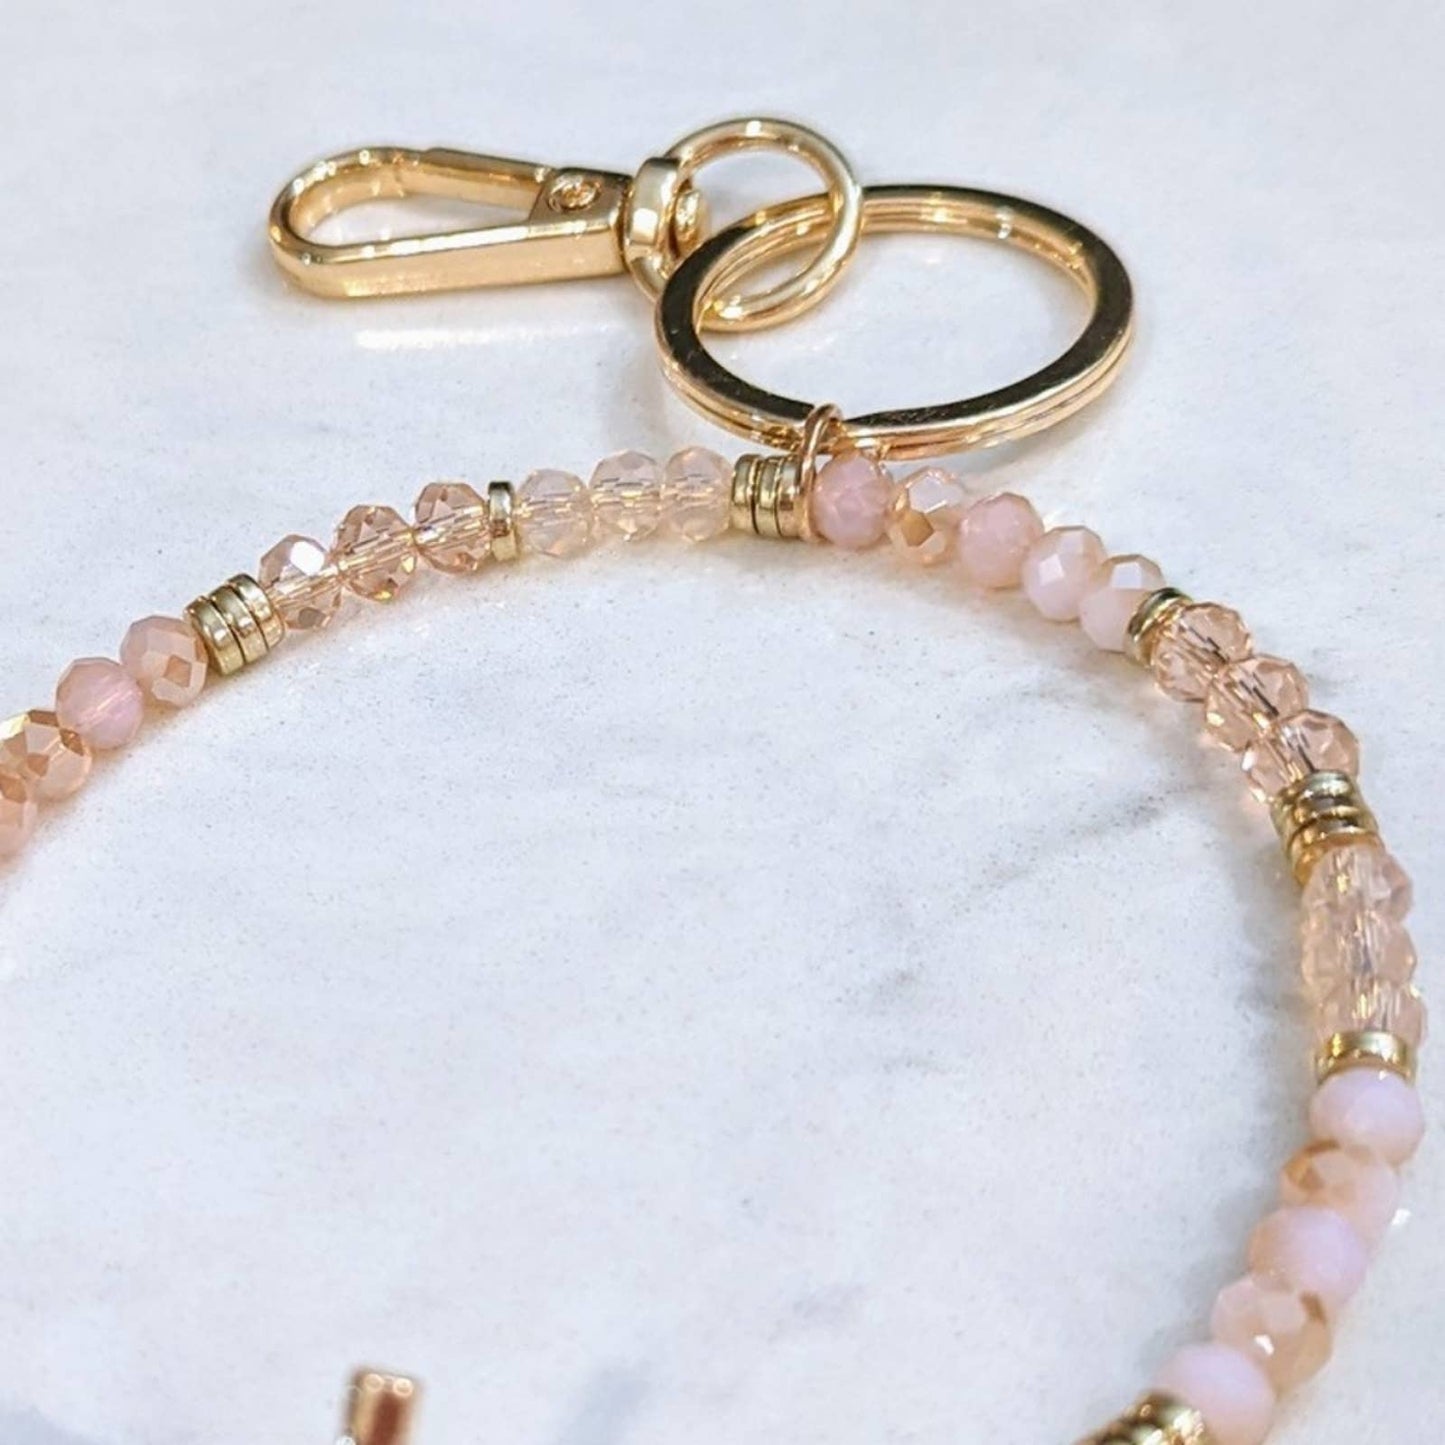 GOLD TONE CROSS Pink Glass Bead Bracelet Style Hoop Key Chain with Closed Hook